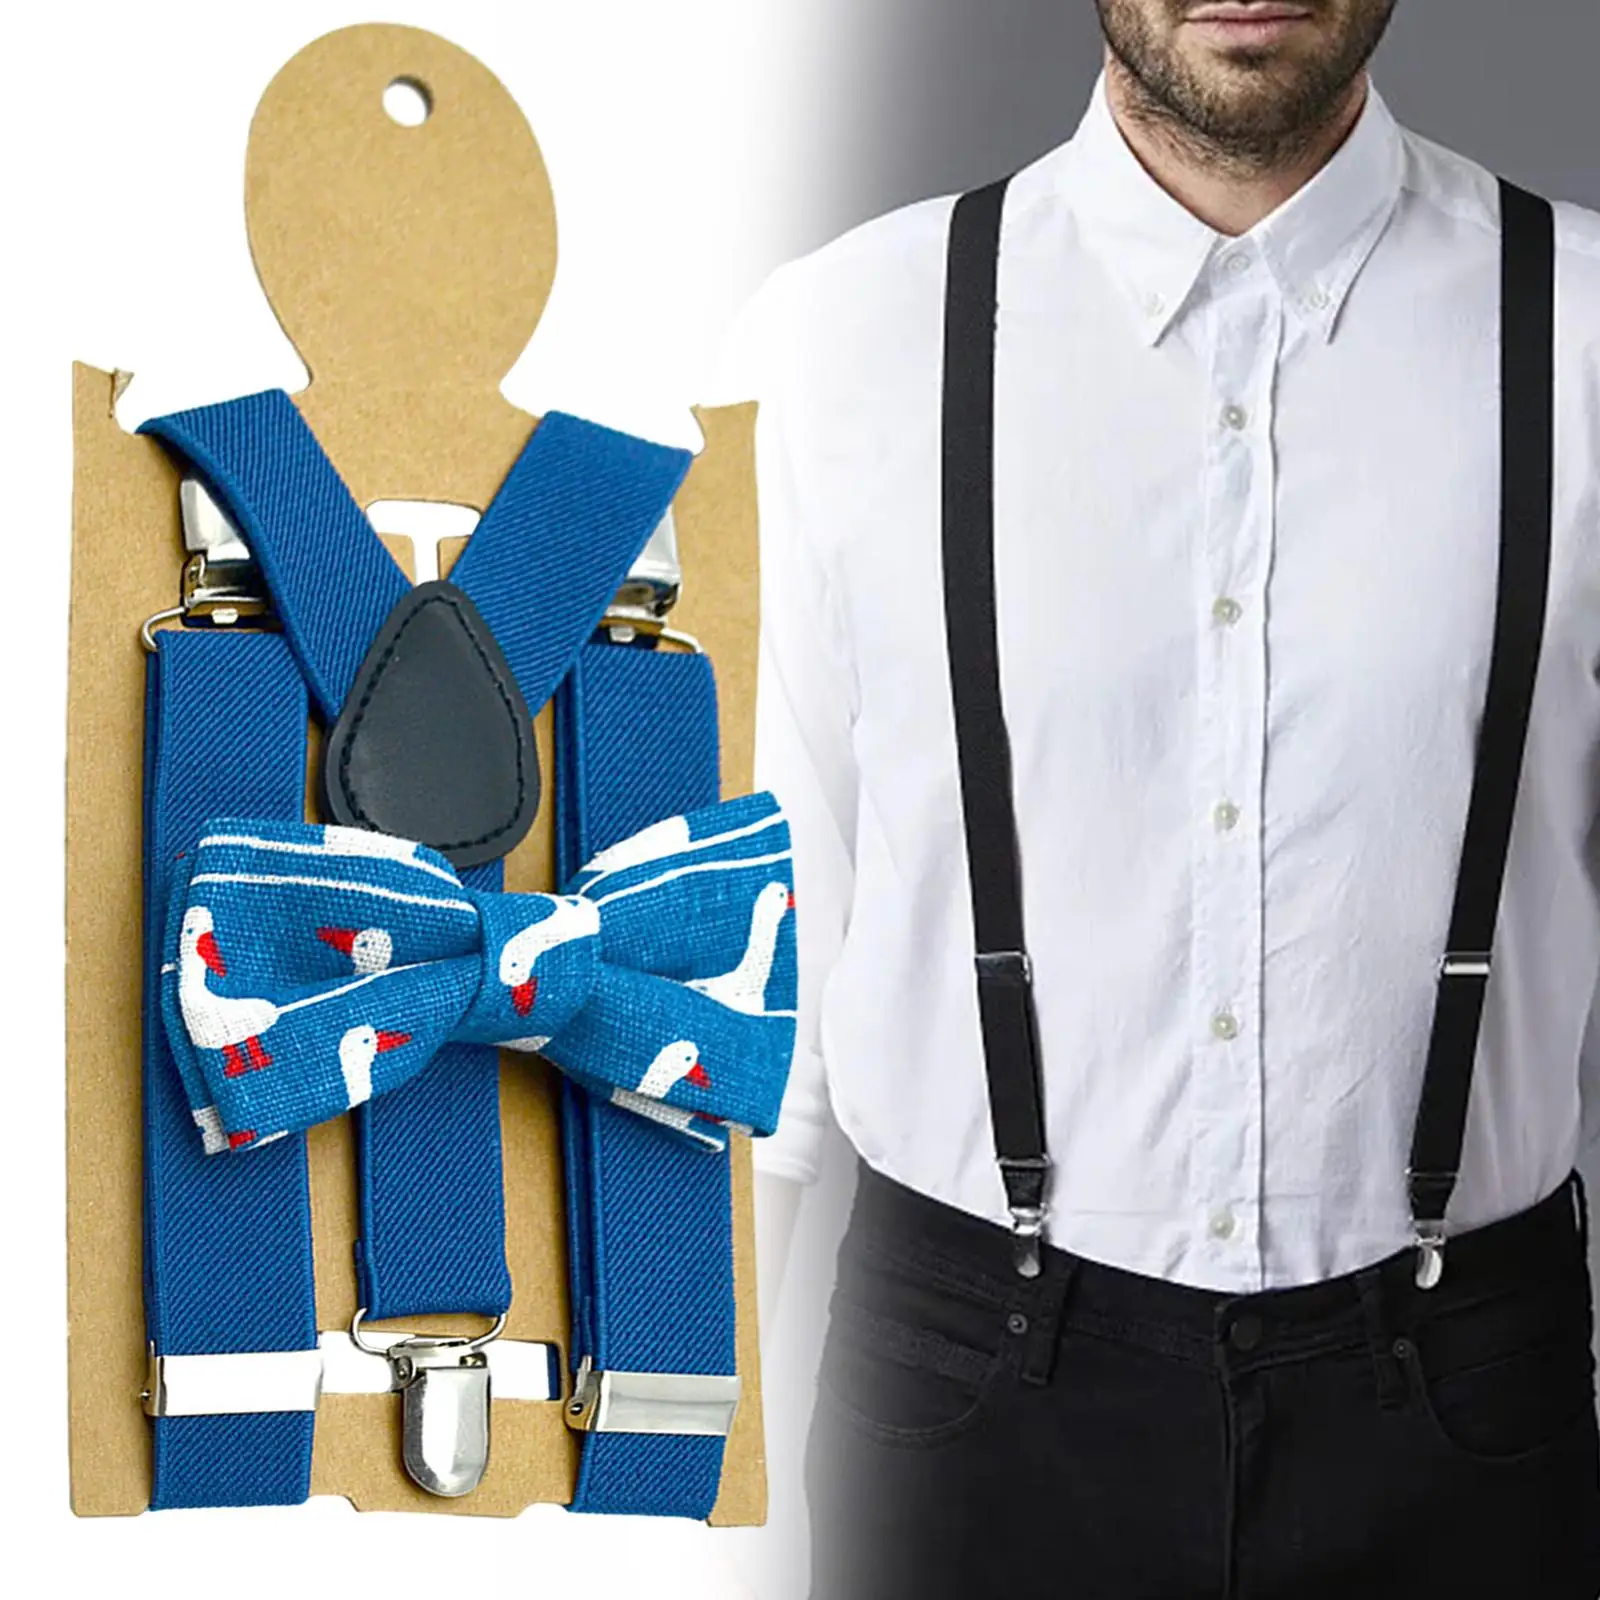 Kids Suspenders Bow Tie Set Elastic 3 Clips Ties Accessories Tuxedo Suspenders for Trousers Party Birthday Formal Wear Dress up